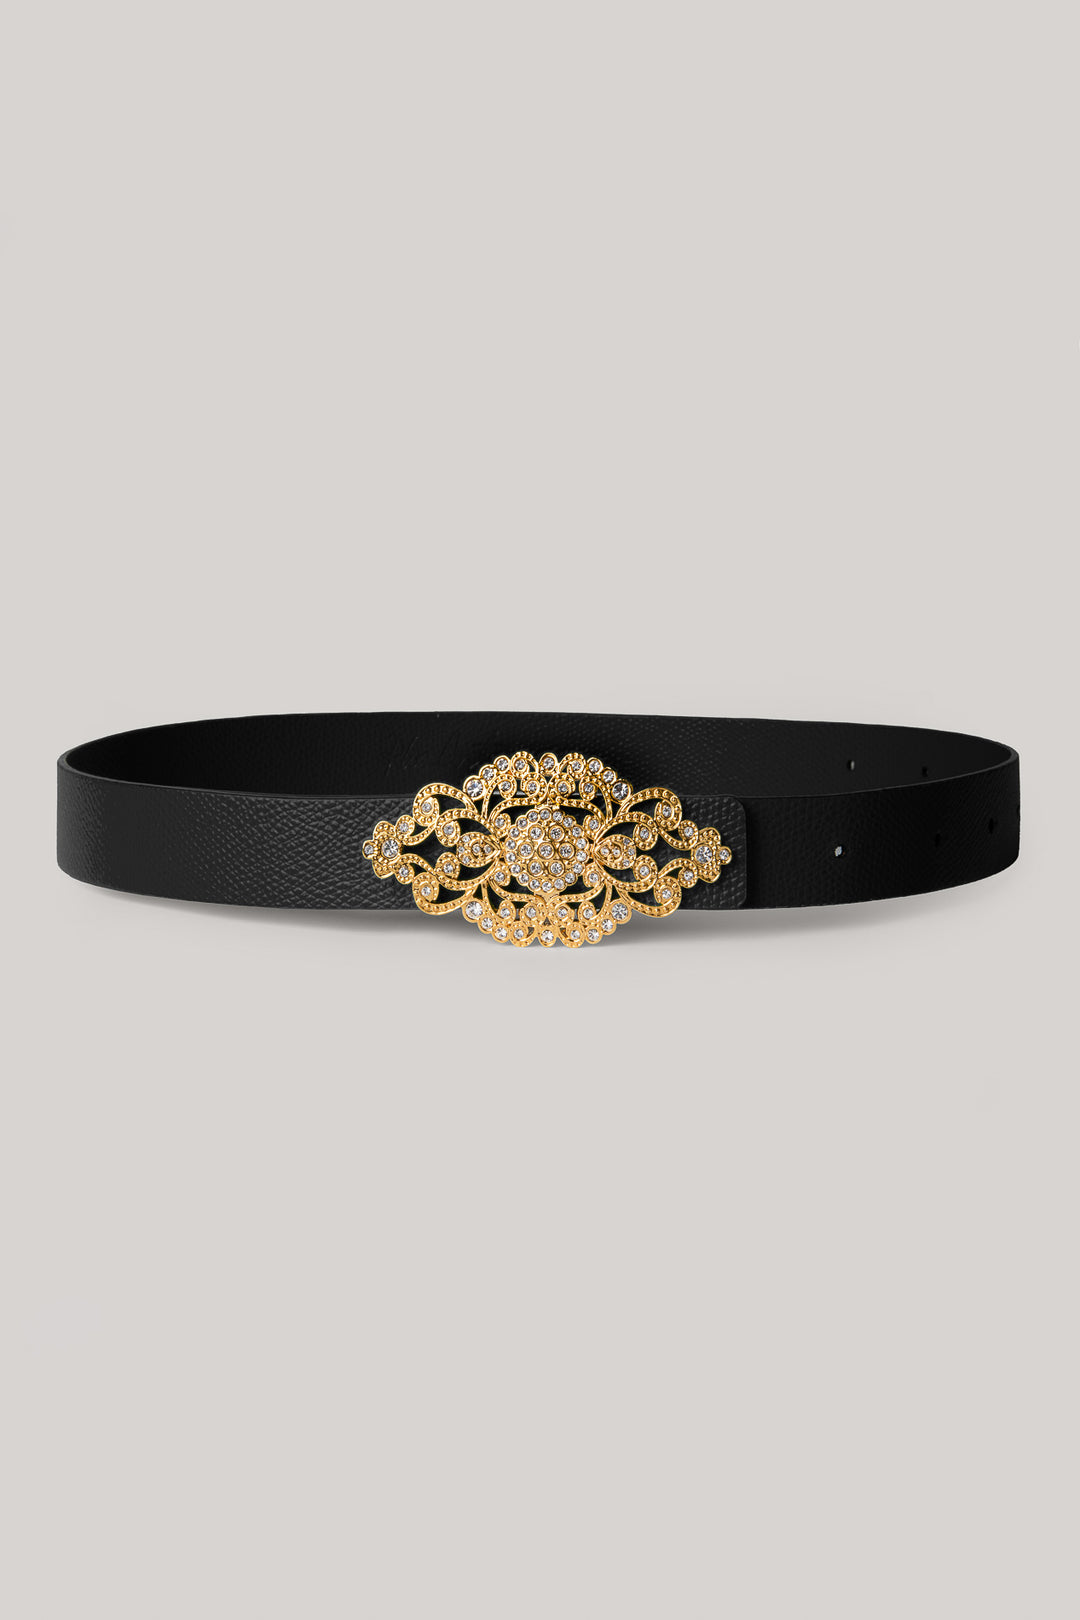 Saffiano Black Leather Waist Belt With Gold Baroque Buckle